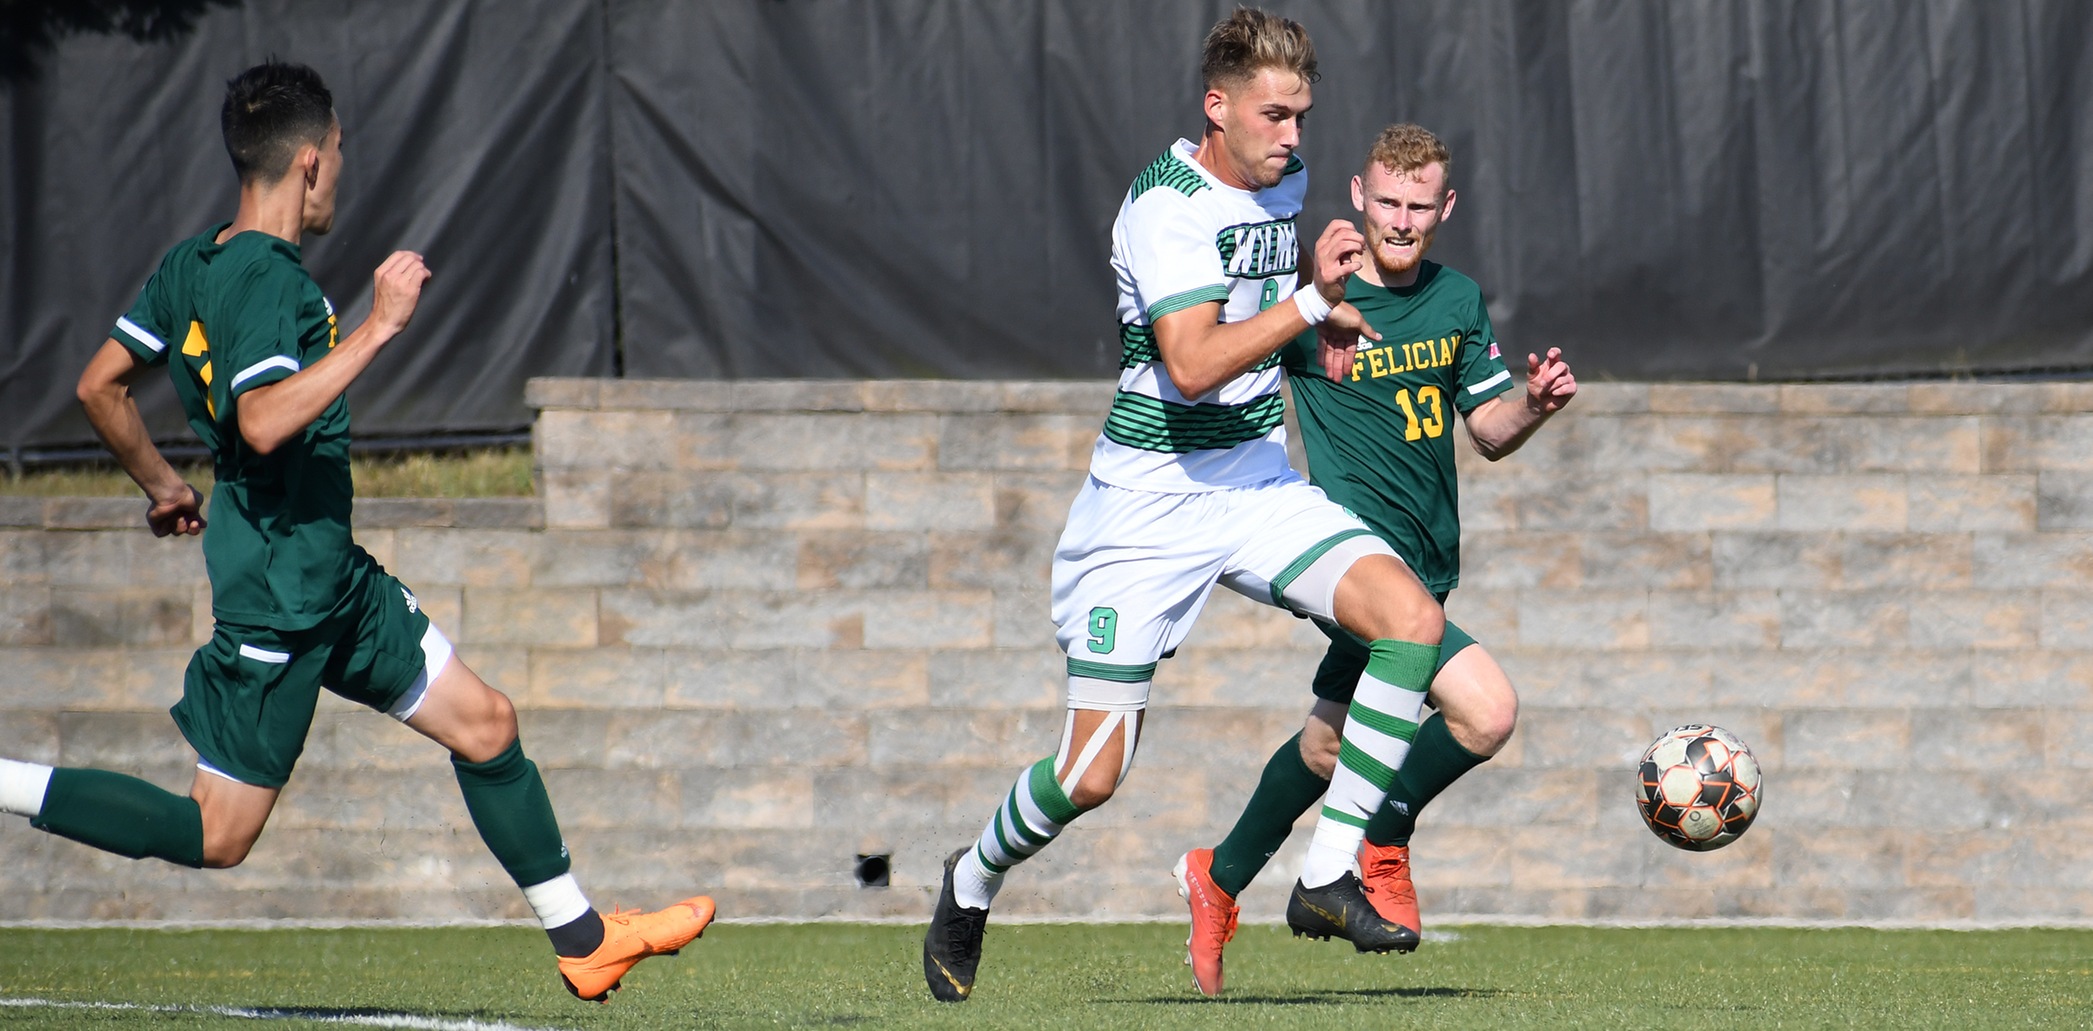 Wilmington University’s player Lorne Bickley (9) controls the ball as Felician College players Dean Wright (13) and Jorge Zerna (7) follow the play during the Men’s NCAA division II soccer match at the Wilmington University sports complex, Saturday September 21, 2019. Photo by Keyana Ringgold